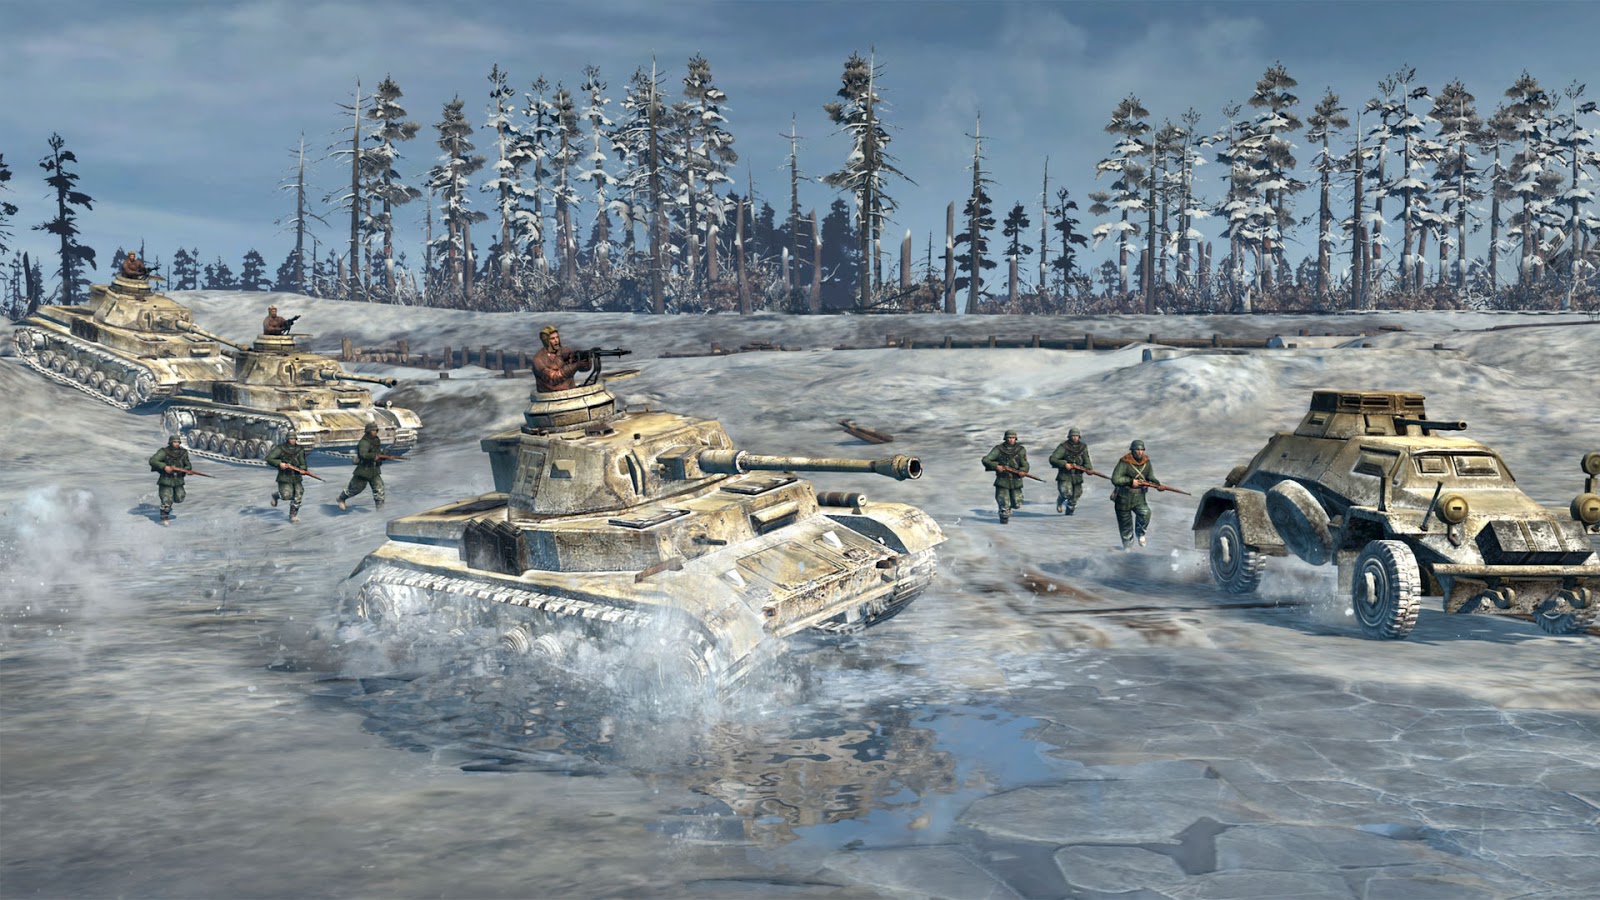 company of heroes 2 crack free download